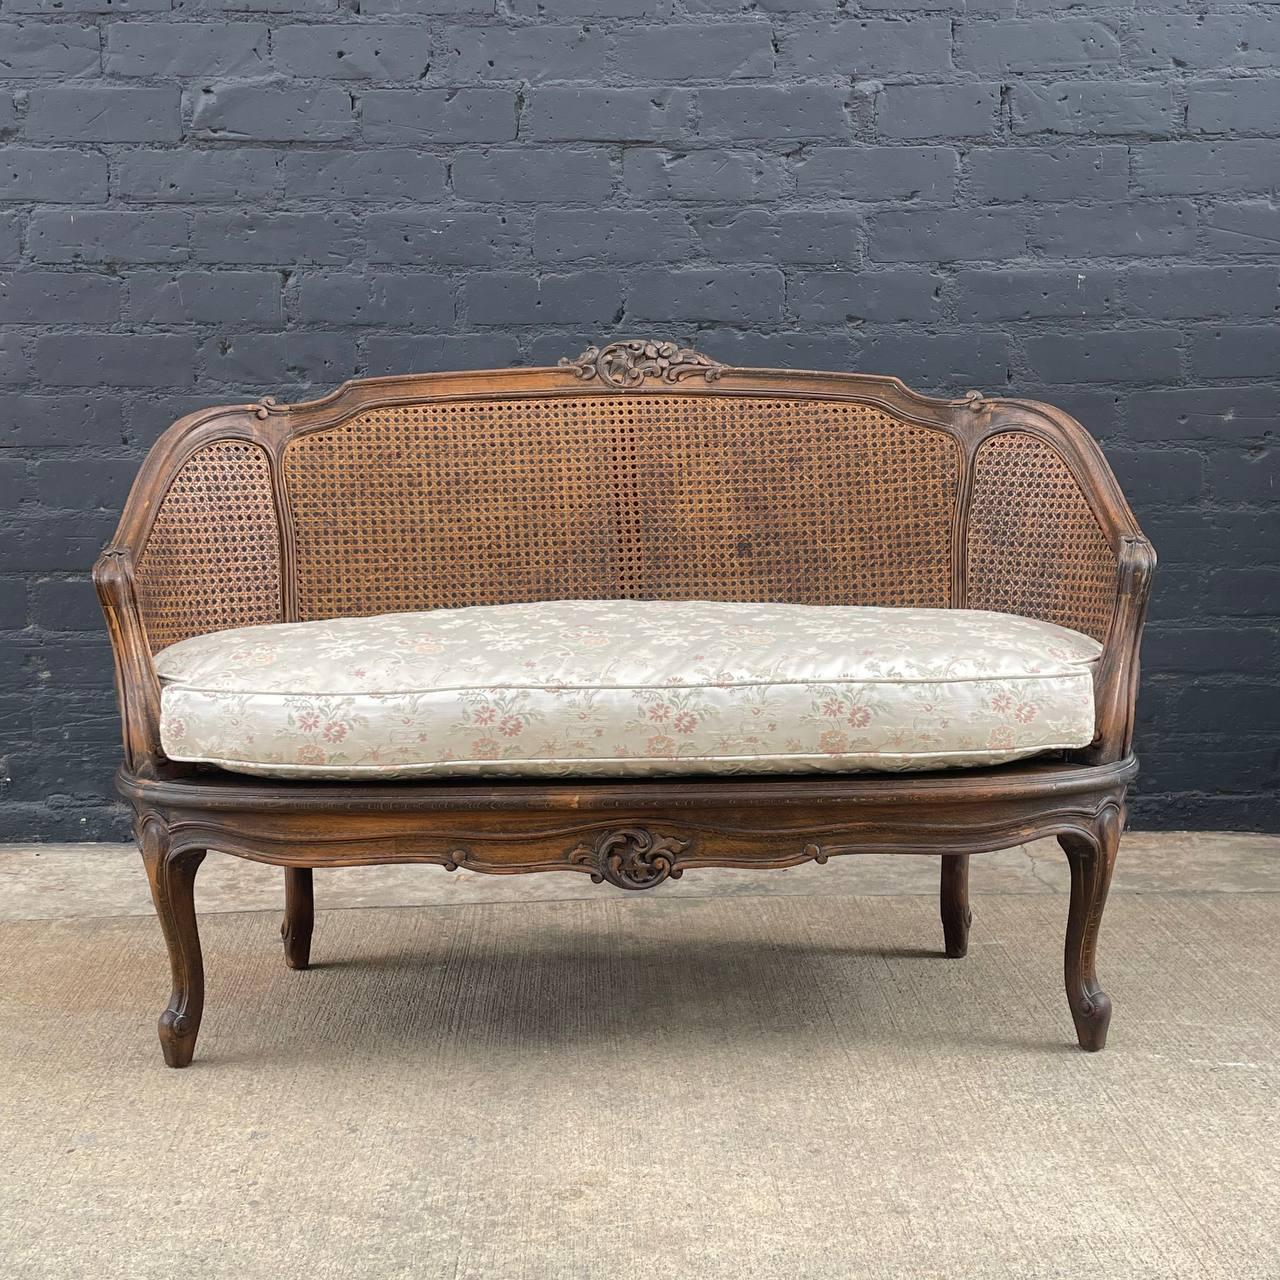 Antique French Louis XV Style Caned Settee Sofa

Country: United States
Materials: Carved Wood, Original Wicker
Condition: New Silk Upholstery with Down Feather
Style: French Antique
Year: 1950’s

$2,500

Dimensions:
33”H x 48”Wx